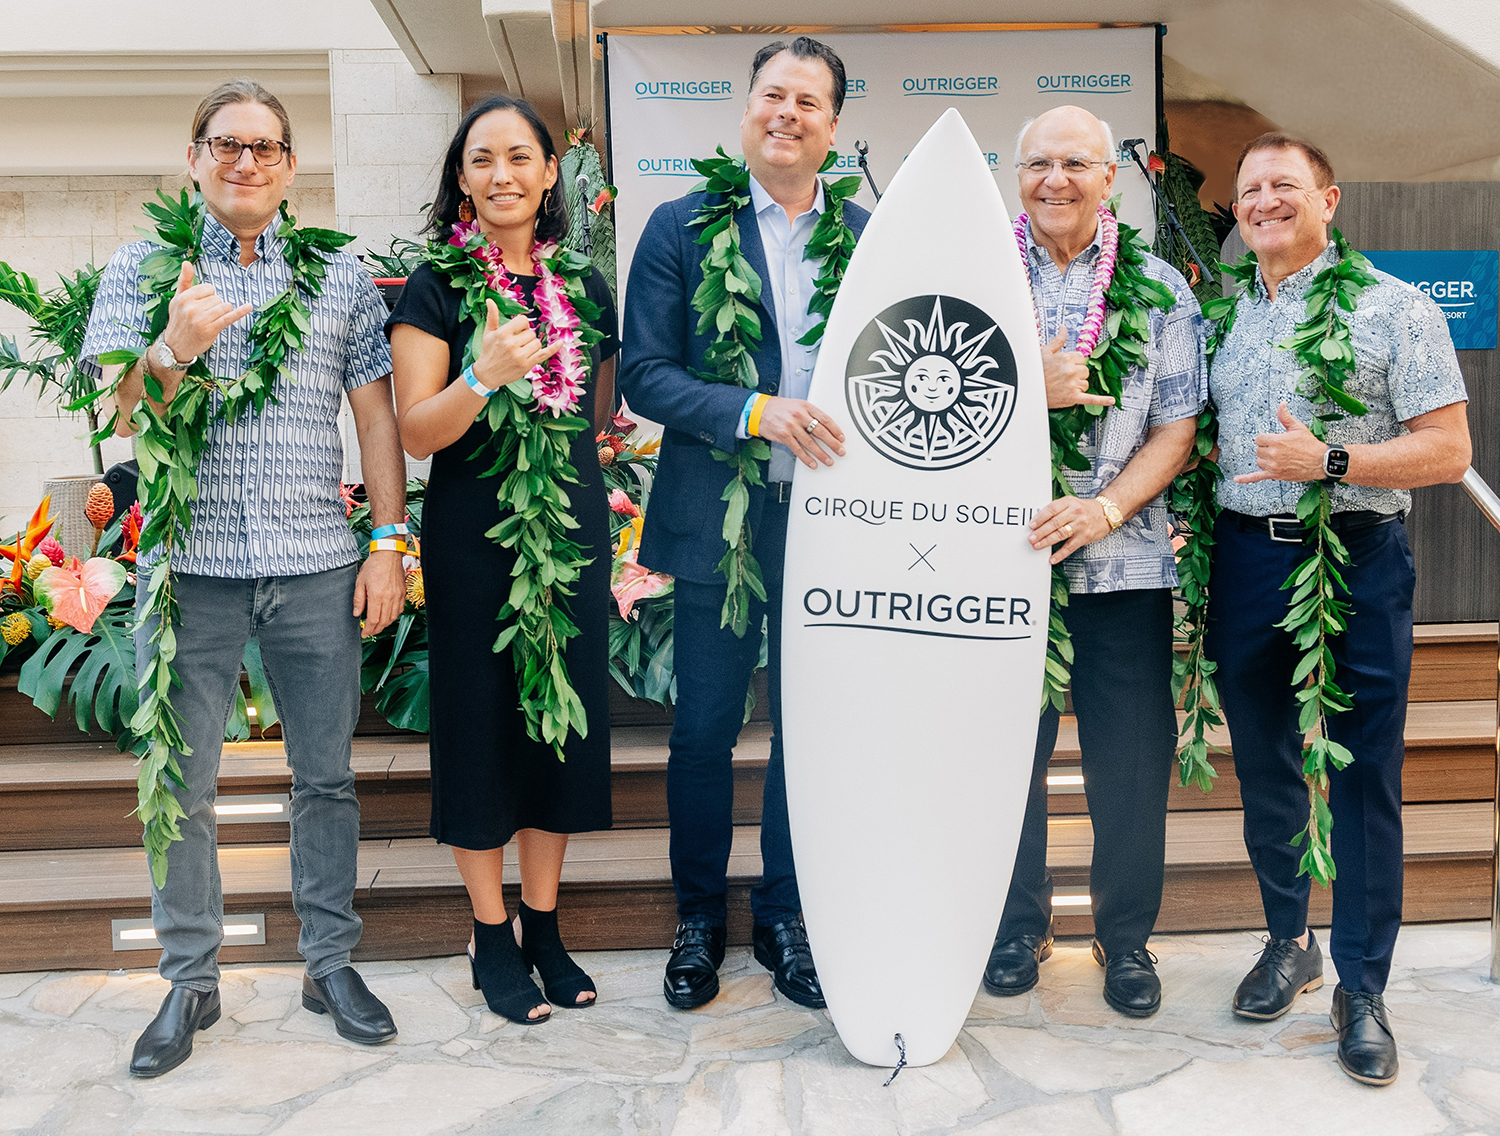 From Left: Simon Painter, Creative Director at Cirque du Soleil; Makanani Salā, Executive Director of Honolulu Mayor’s Office of Culture and the Arts; Eric Grilly, Cirque du Soleil President of Resident and Affiliate Shows; Honolulu Mayor Rick Blangiardi; Jeff Wagoner, President and CEO of Outrigger Hospitality Group.